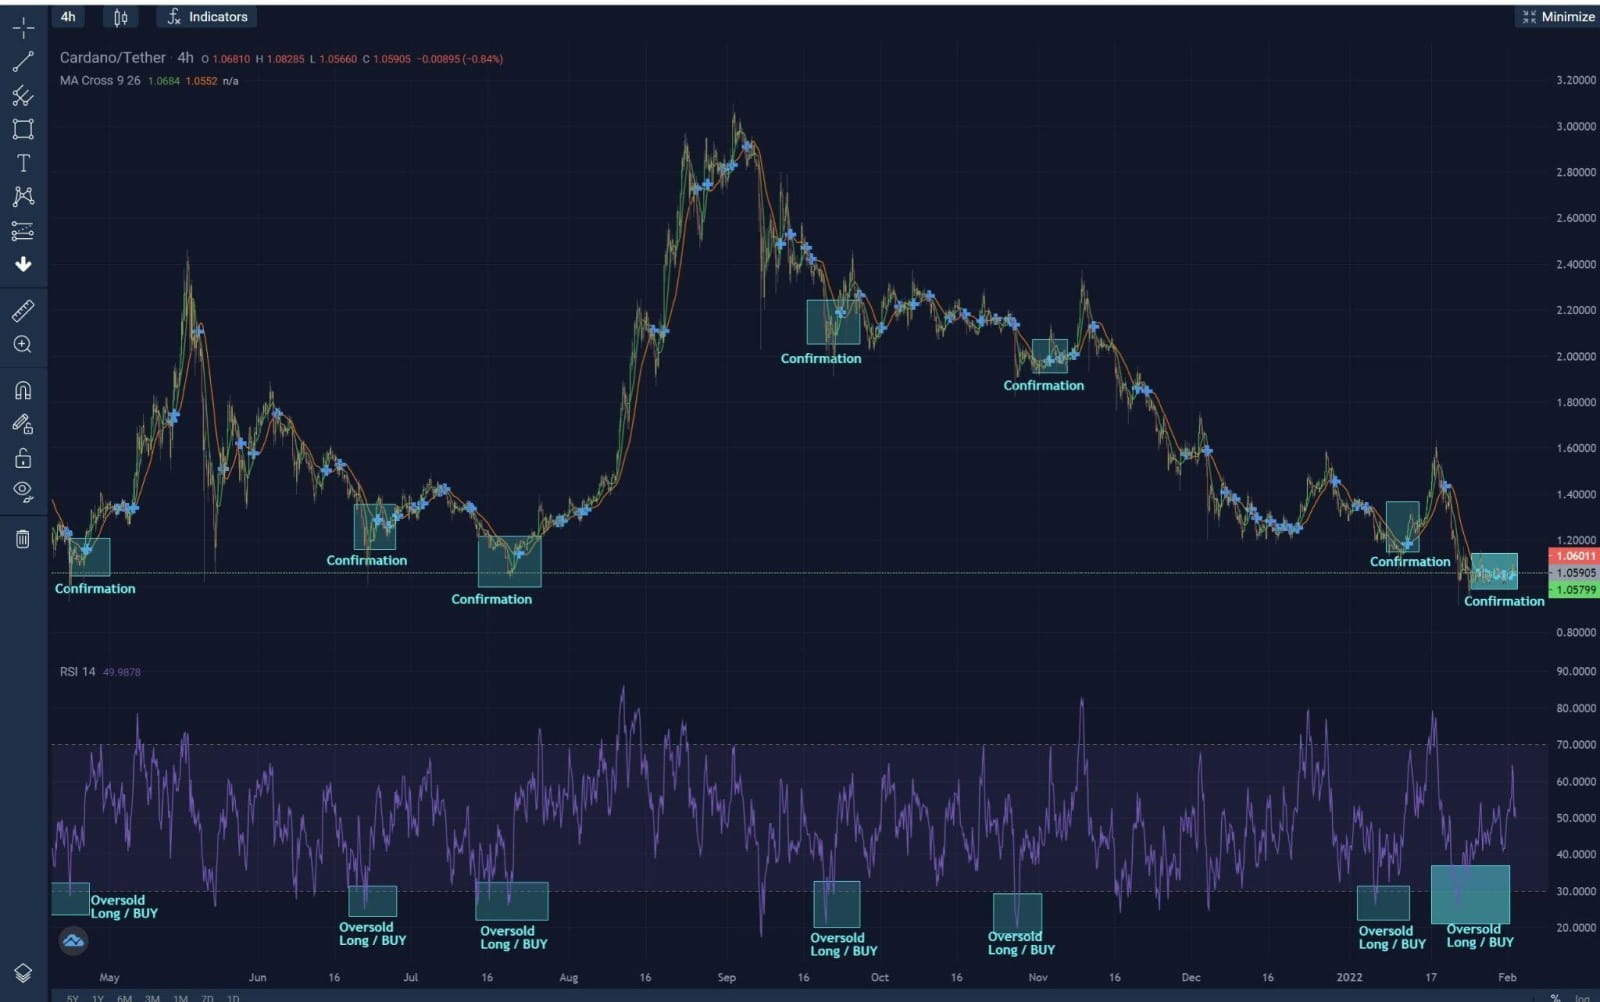 Cardano/Tether chart with analysis